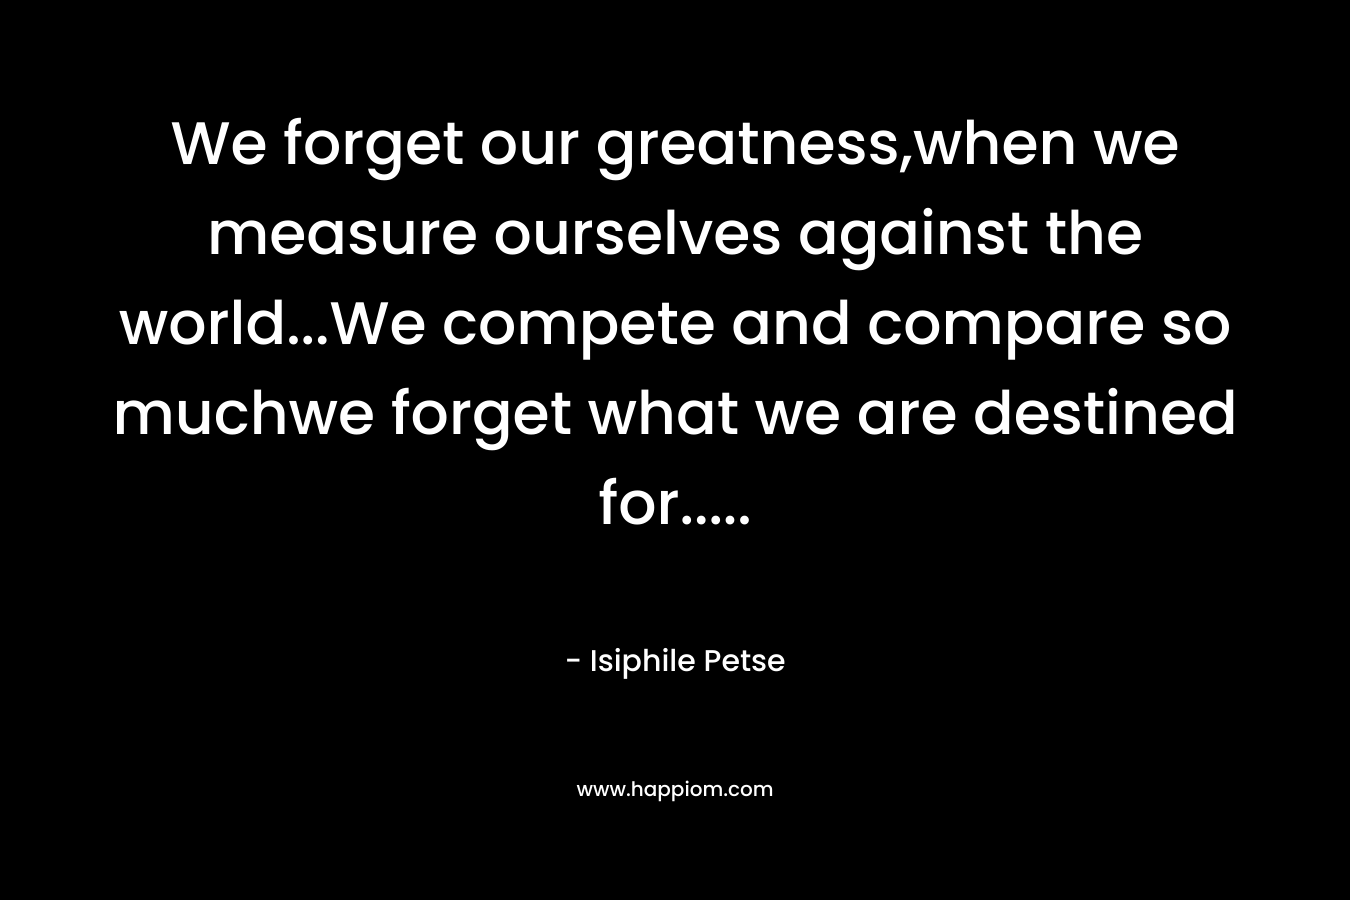 We forget our greatness,when we measure ourselves against the world...We compete and compare so muchwe forget what we are destined for.....